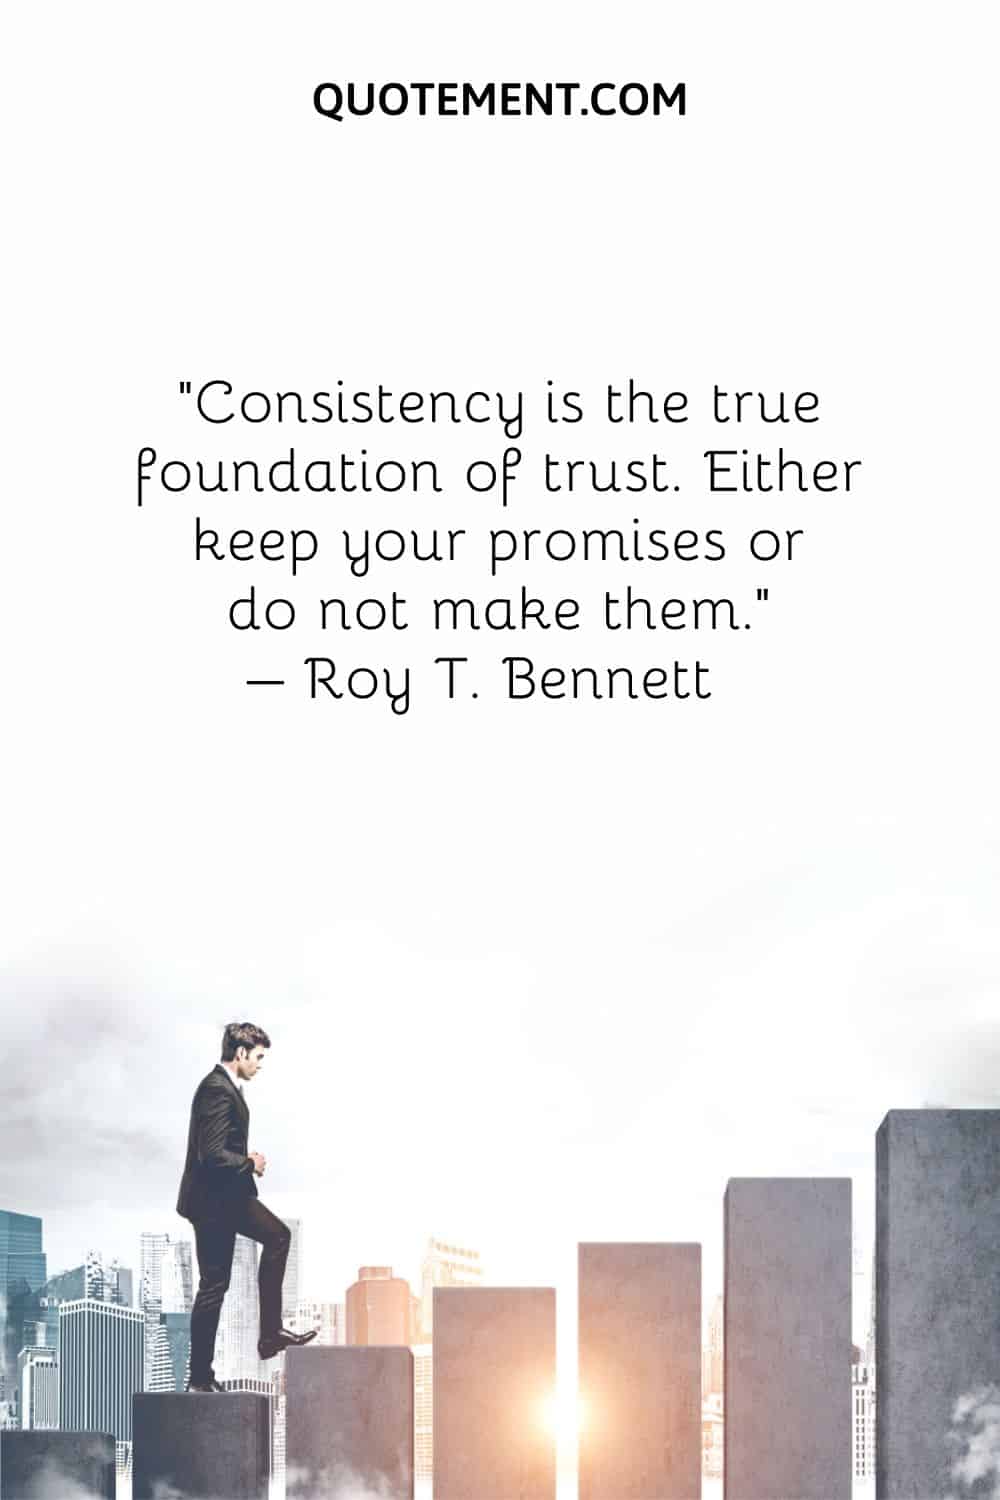 Consistency is the true foundation of trust